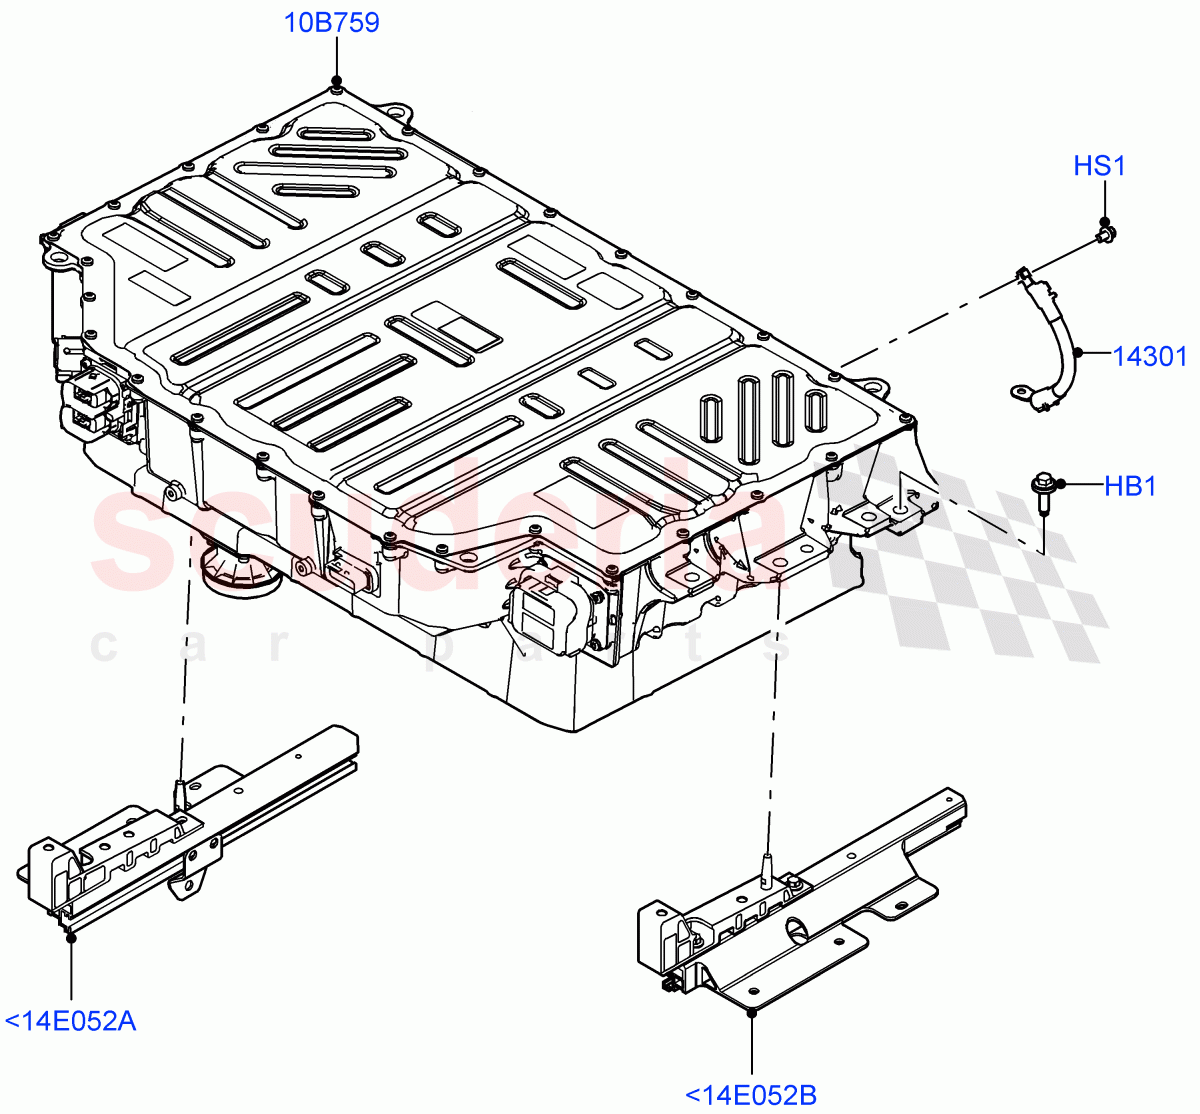 Hybrid Electrical Modules(Traction Battery)(Electric Engine Battery-PHEV)((V)FROMM2000001) of Land Rover Land Rover Defender (2020+) [2.0 Turbo Diesel]